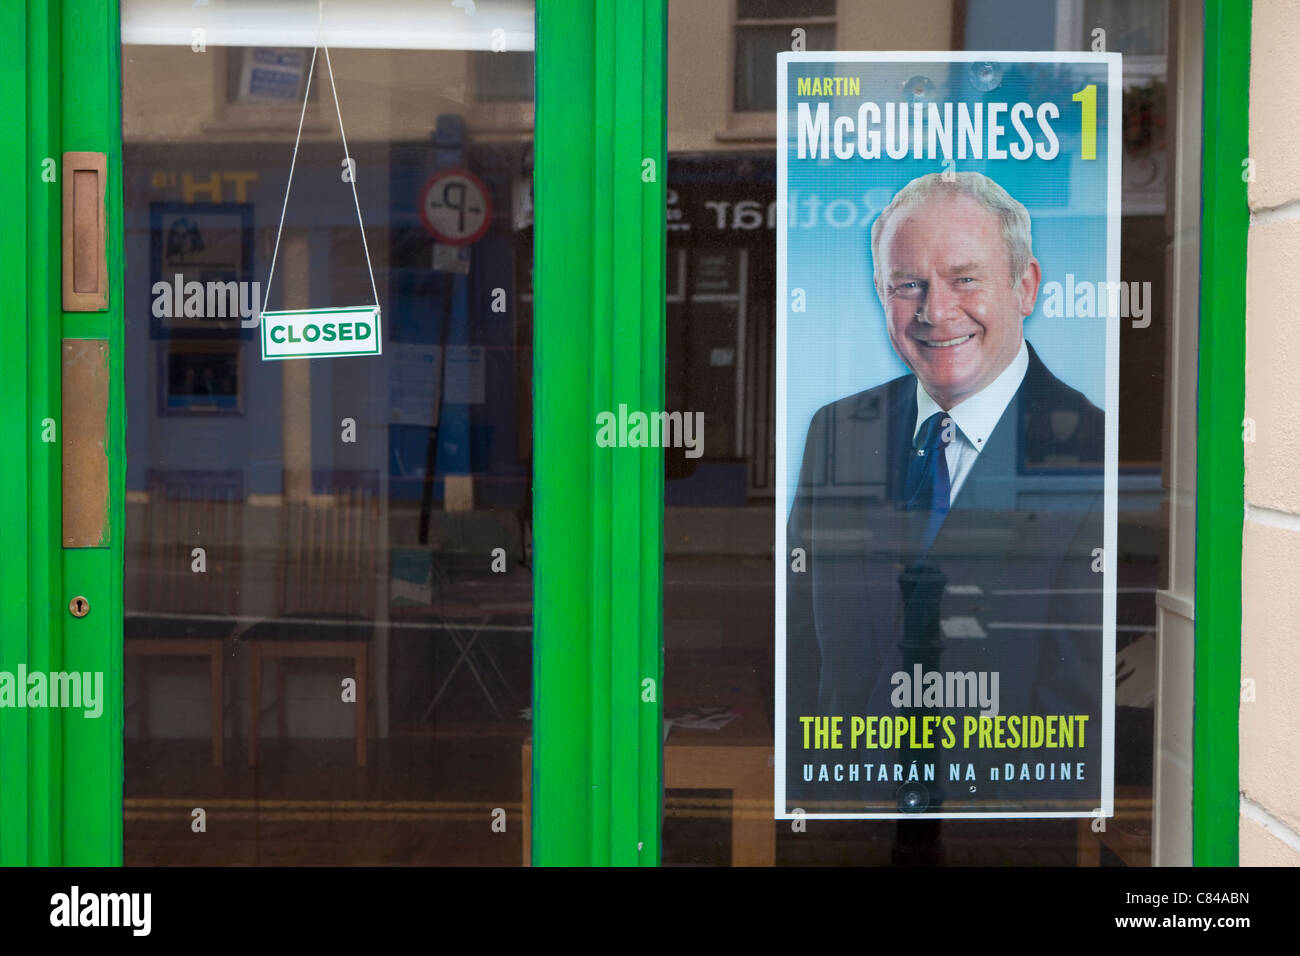 Poster of Sinn Fein presidential candidate Martin McGuinness in the race for the Irish presidency. Stock Photo